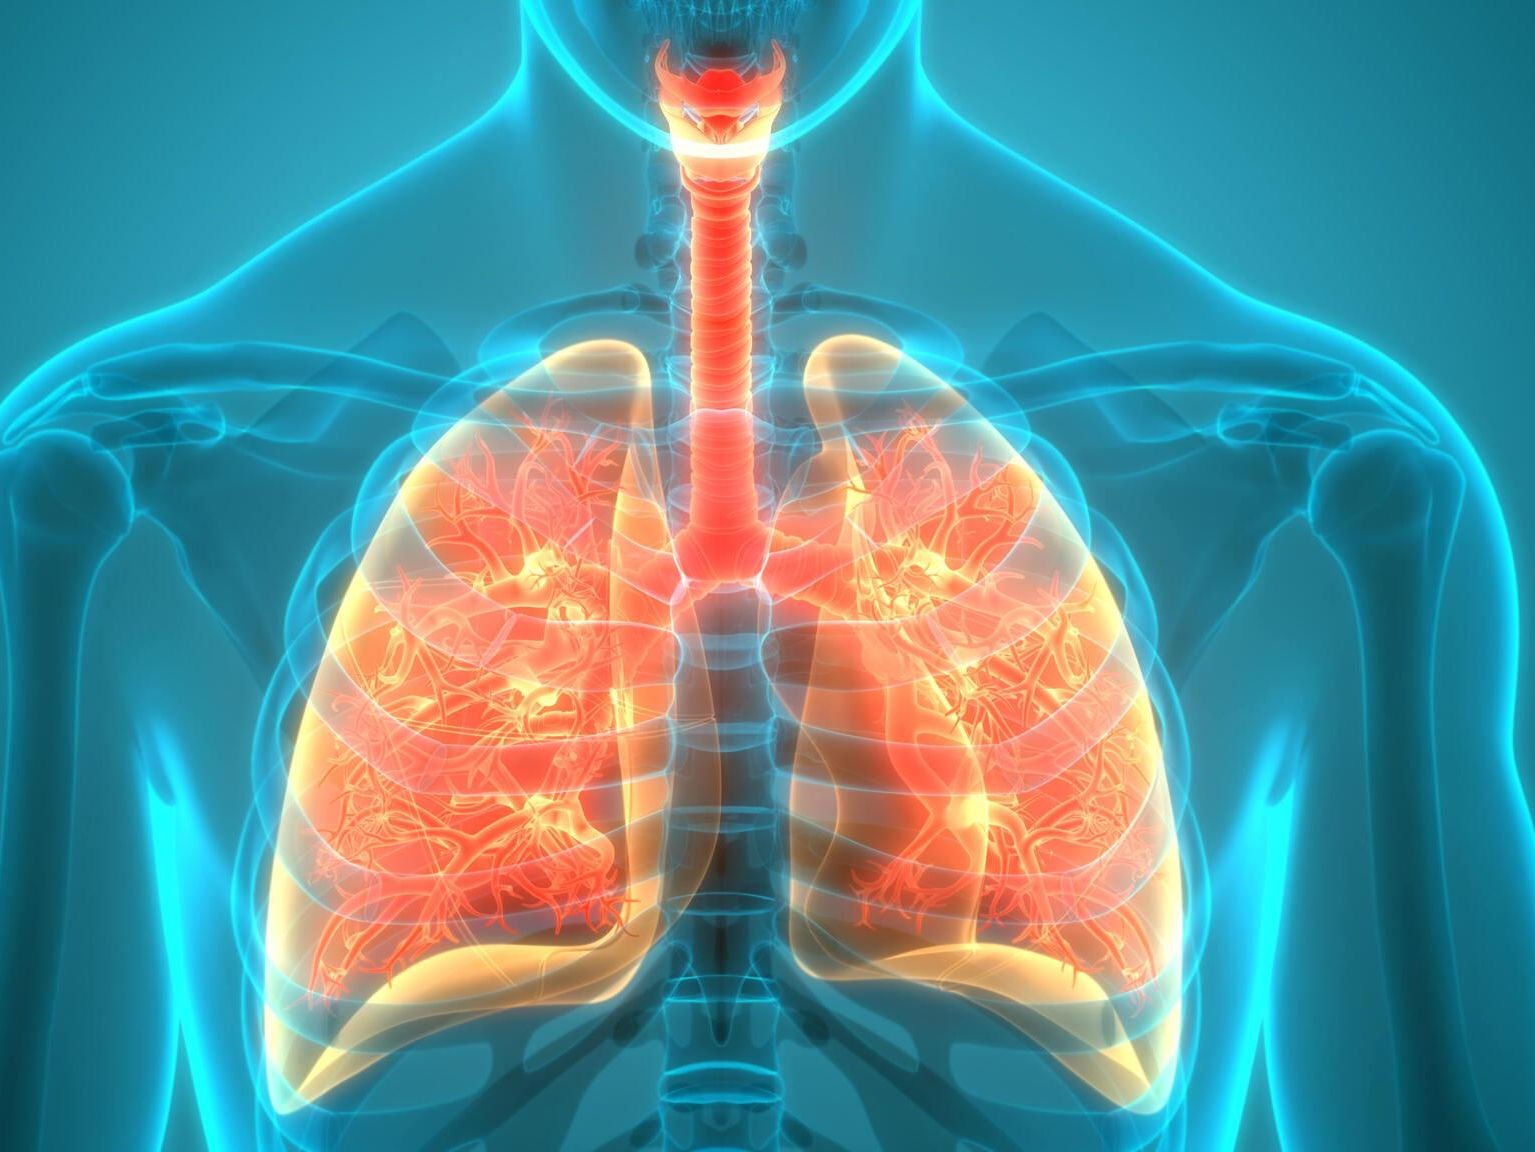 Respiratory conditions like asthma, COPD, pneumonia, and lung cancer, treatment at Rudraksha Multispeciality Hospitals